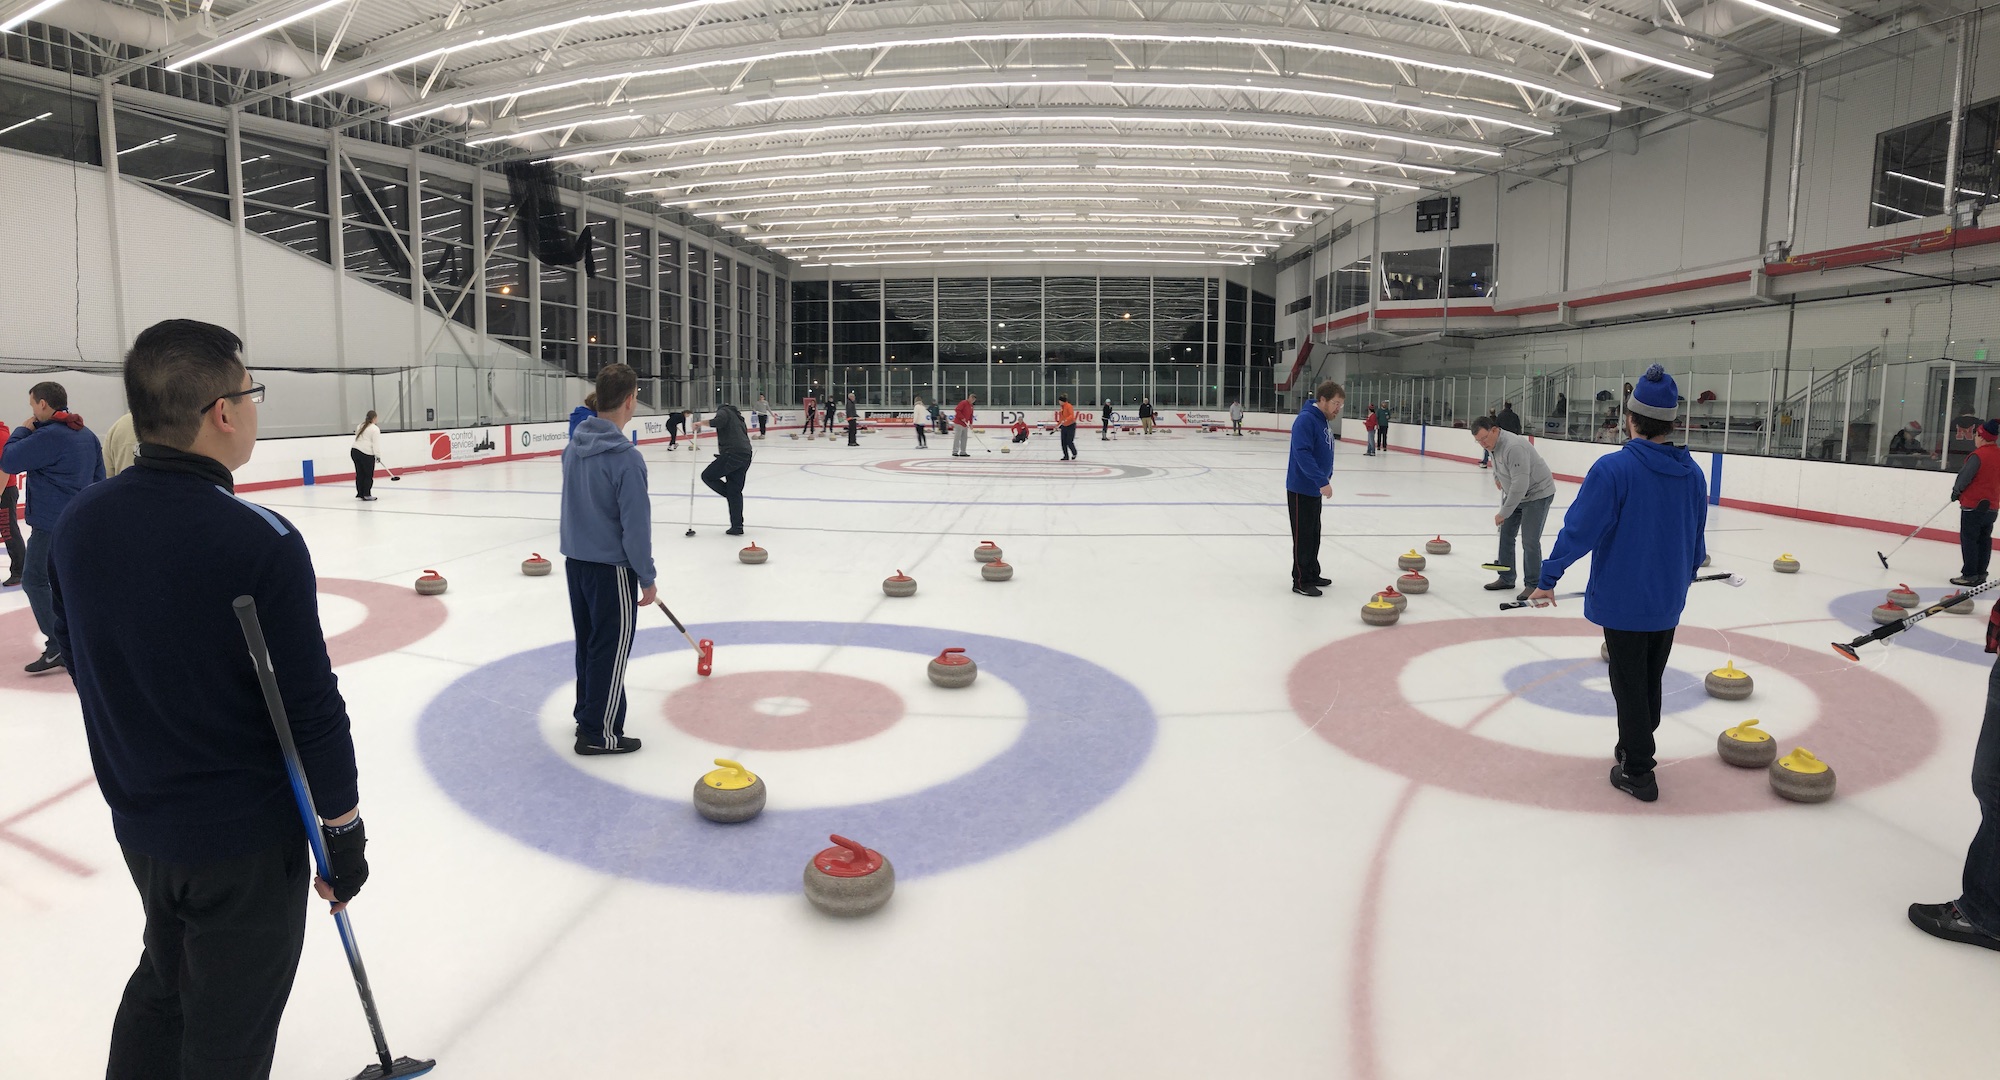 Practice Ice / Drop-in Curling - Wednesday, July 13, 2022 at 8:00pm